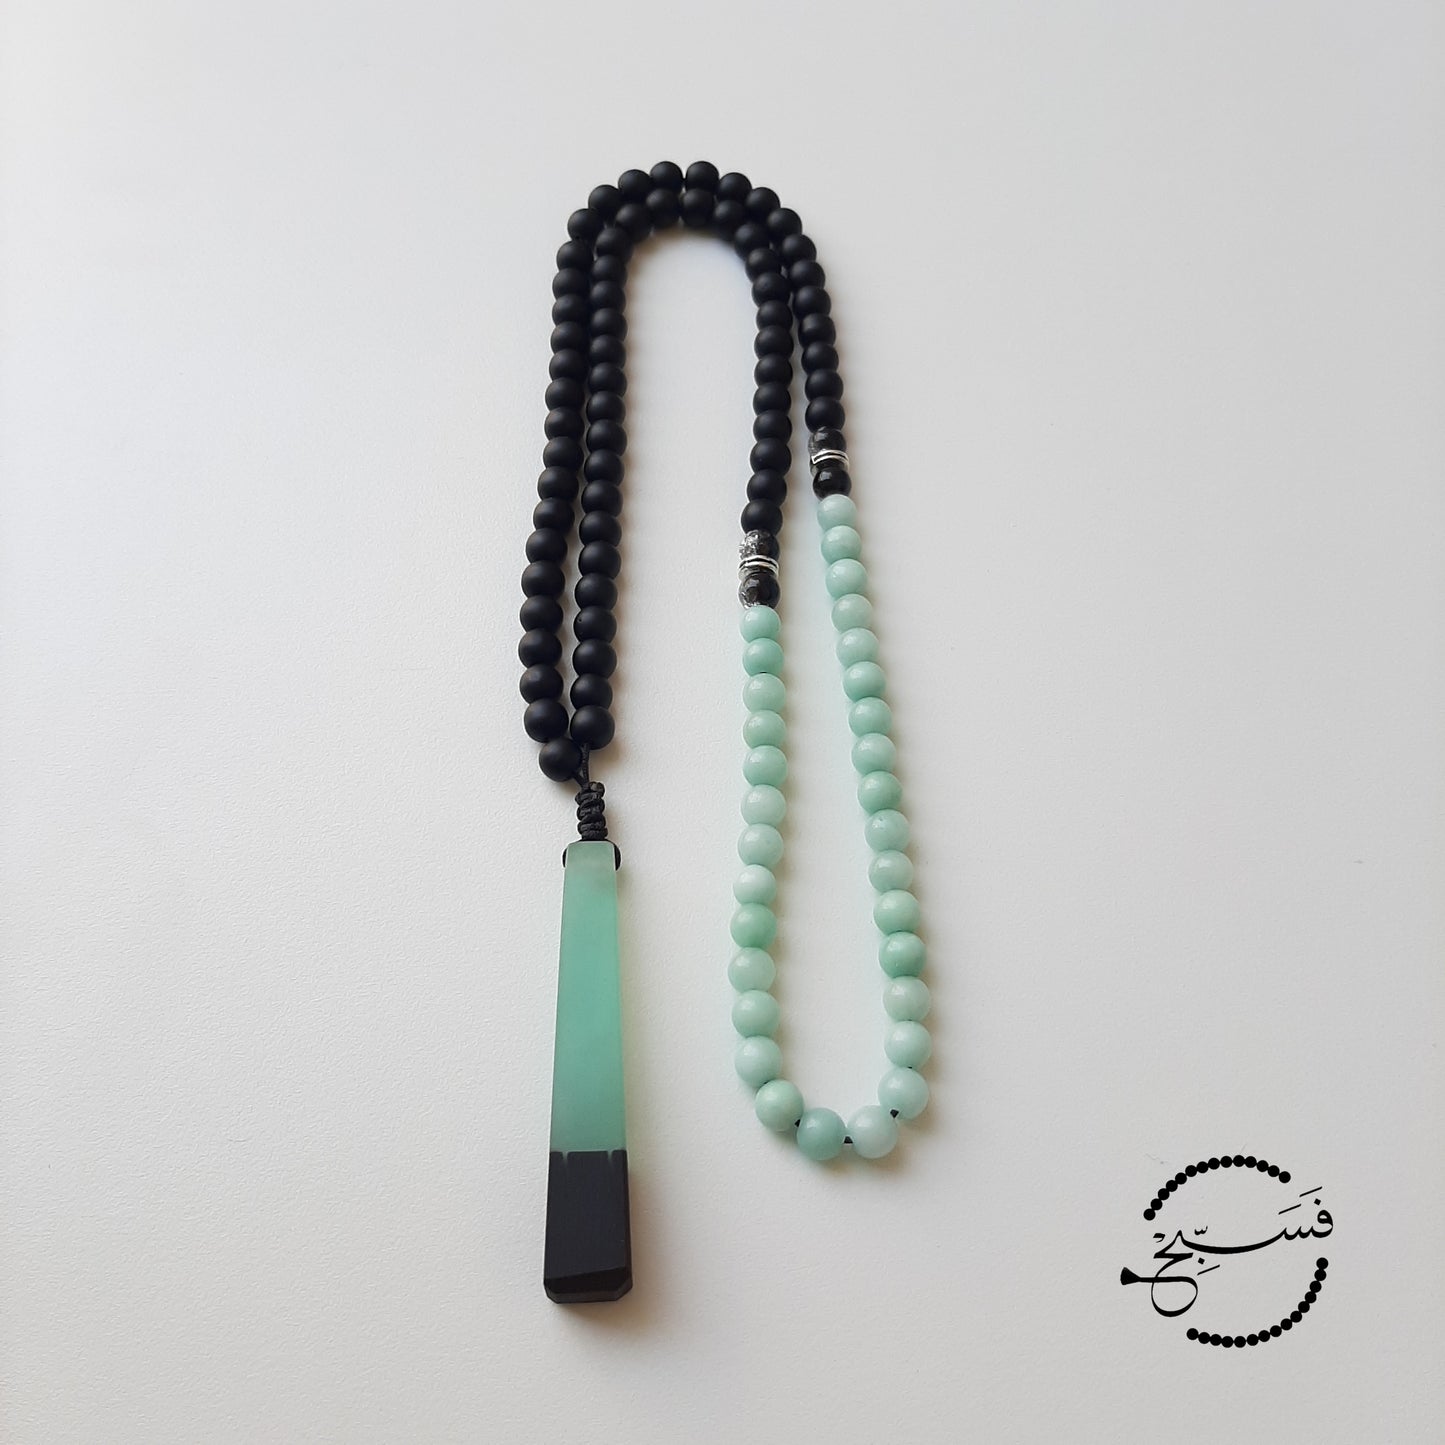 Amazonite and matte black beads, with a hint of silvery crystal beads and a resin pendant.  Packaged in a luxurious pouch and a gift box.  99 beads